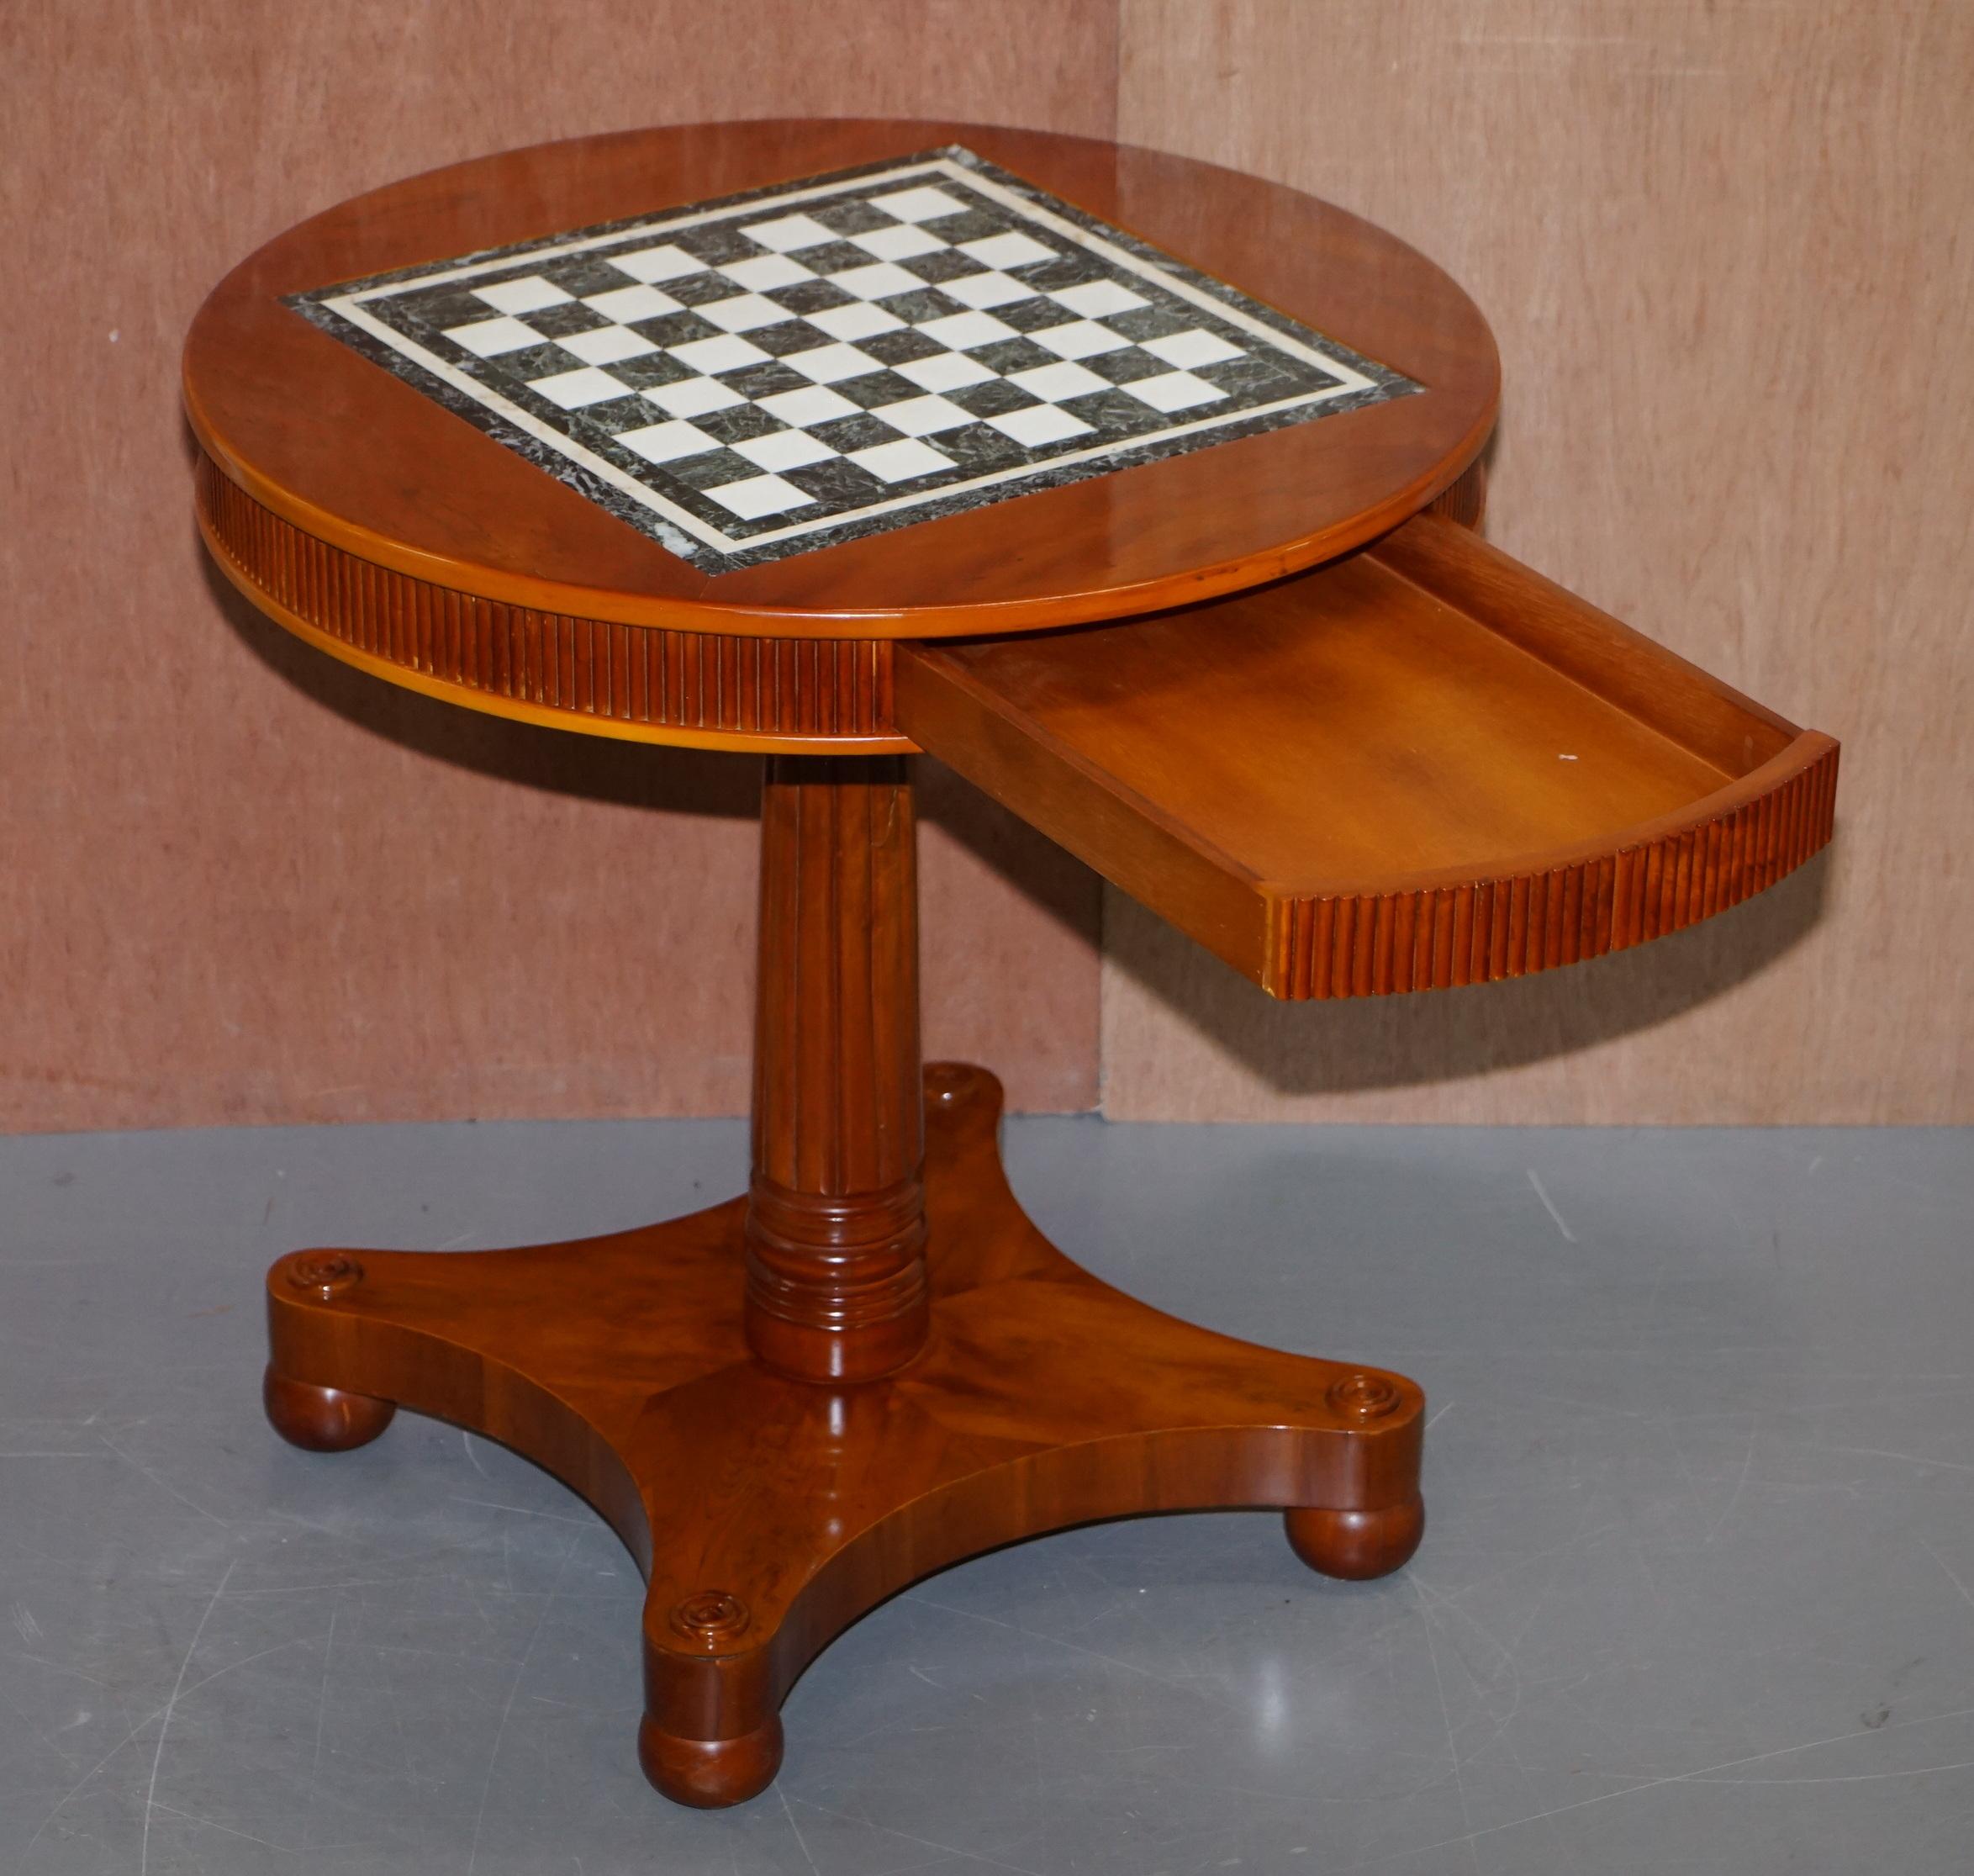 Vintage English Flamed Walnut Chess Table with Marble Inset Board Hidden Drawer 9